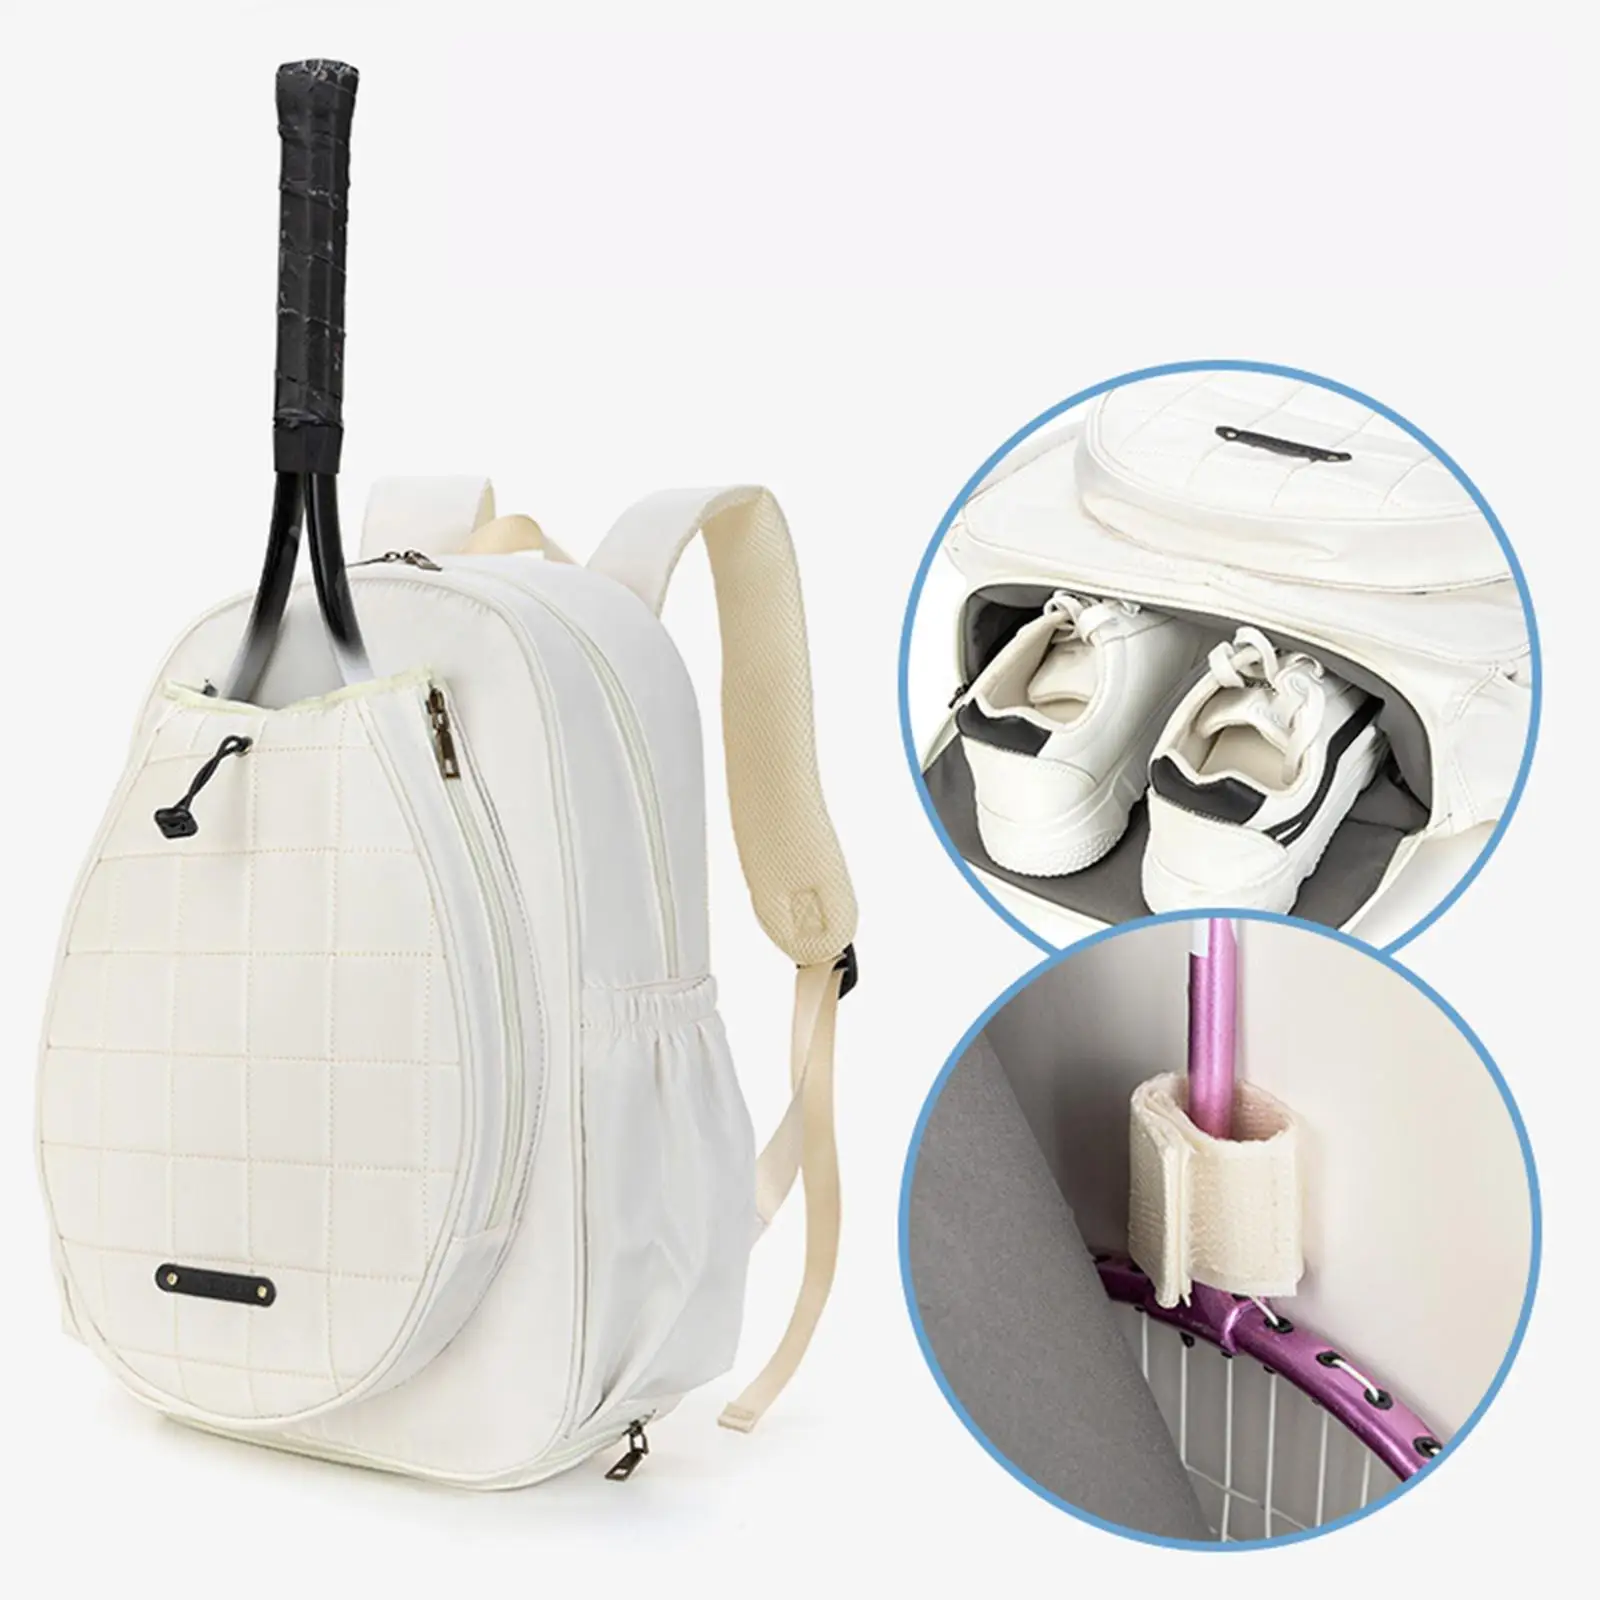 Tennis Backpack Tennis Bag Portable for Balls Accessories Pickleball Paddles